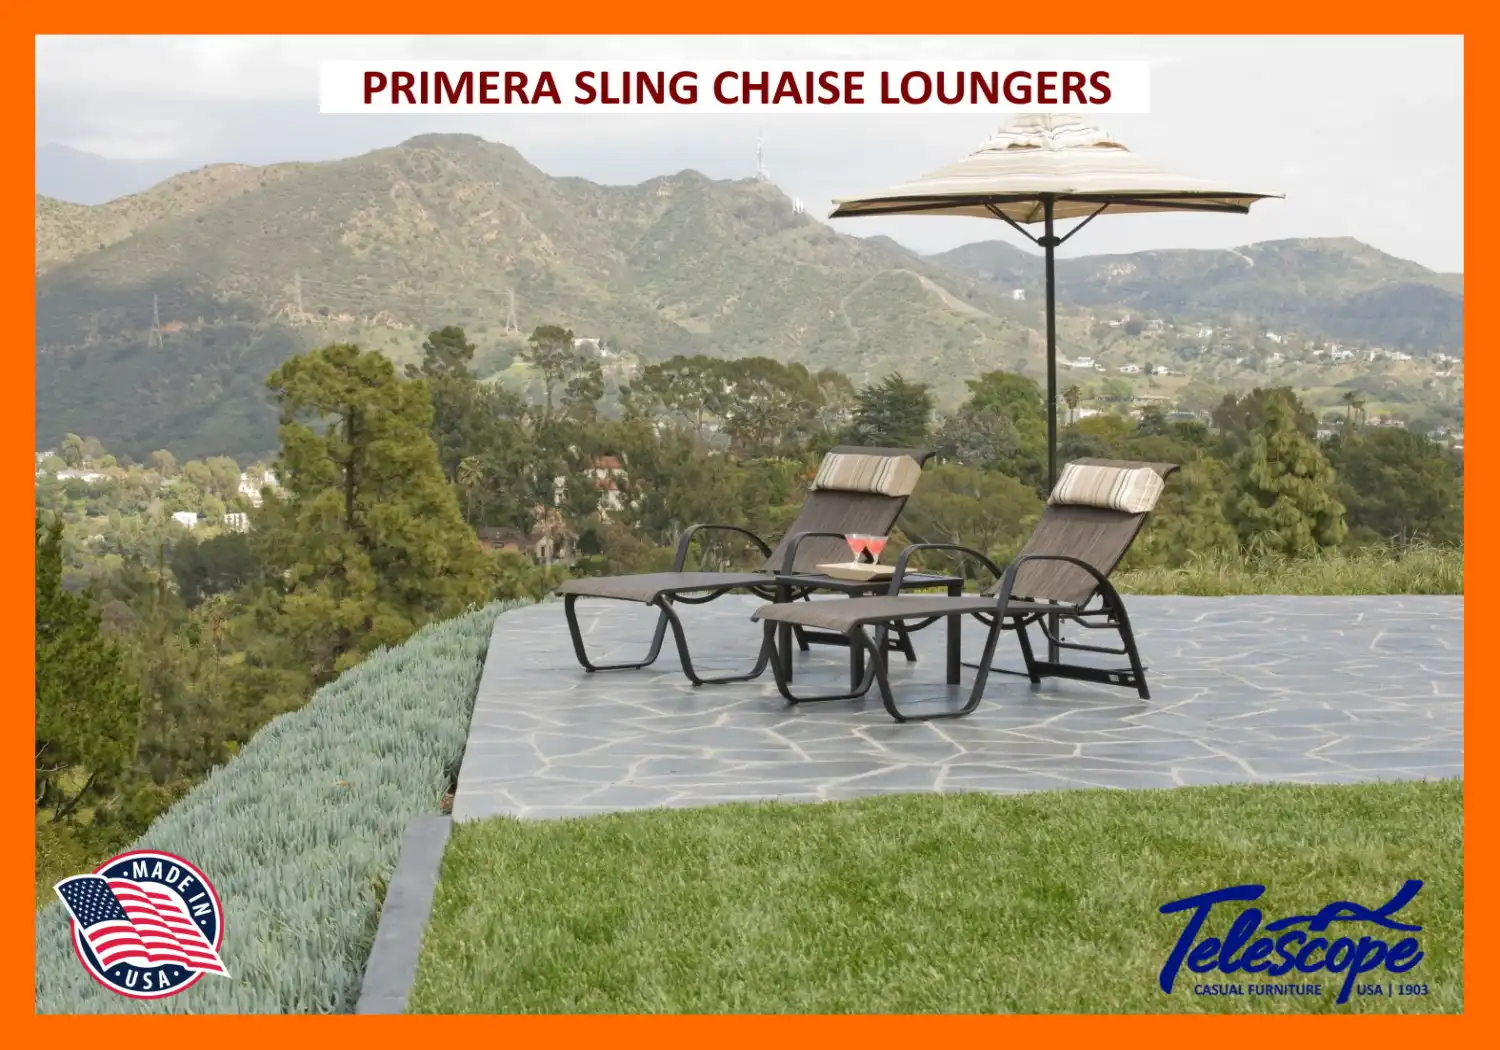 PRIMERA SLING CHAISE LOUNGERS